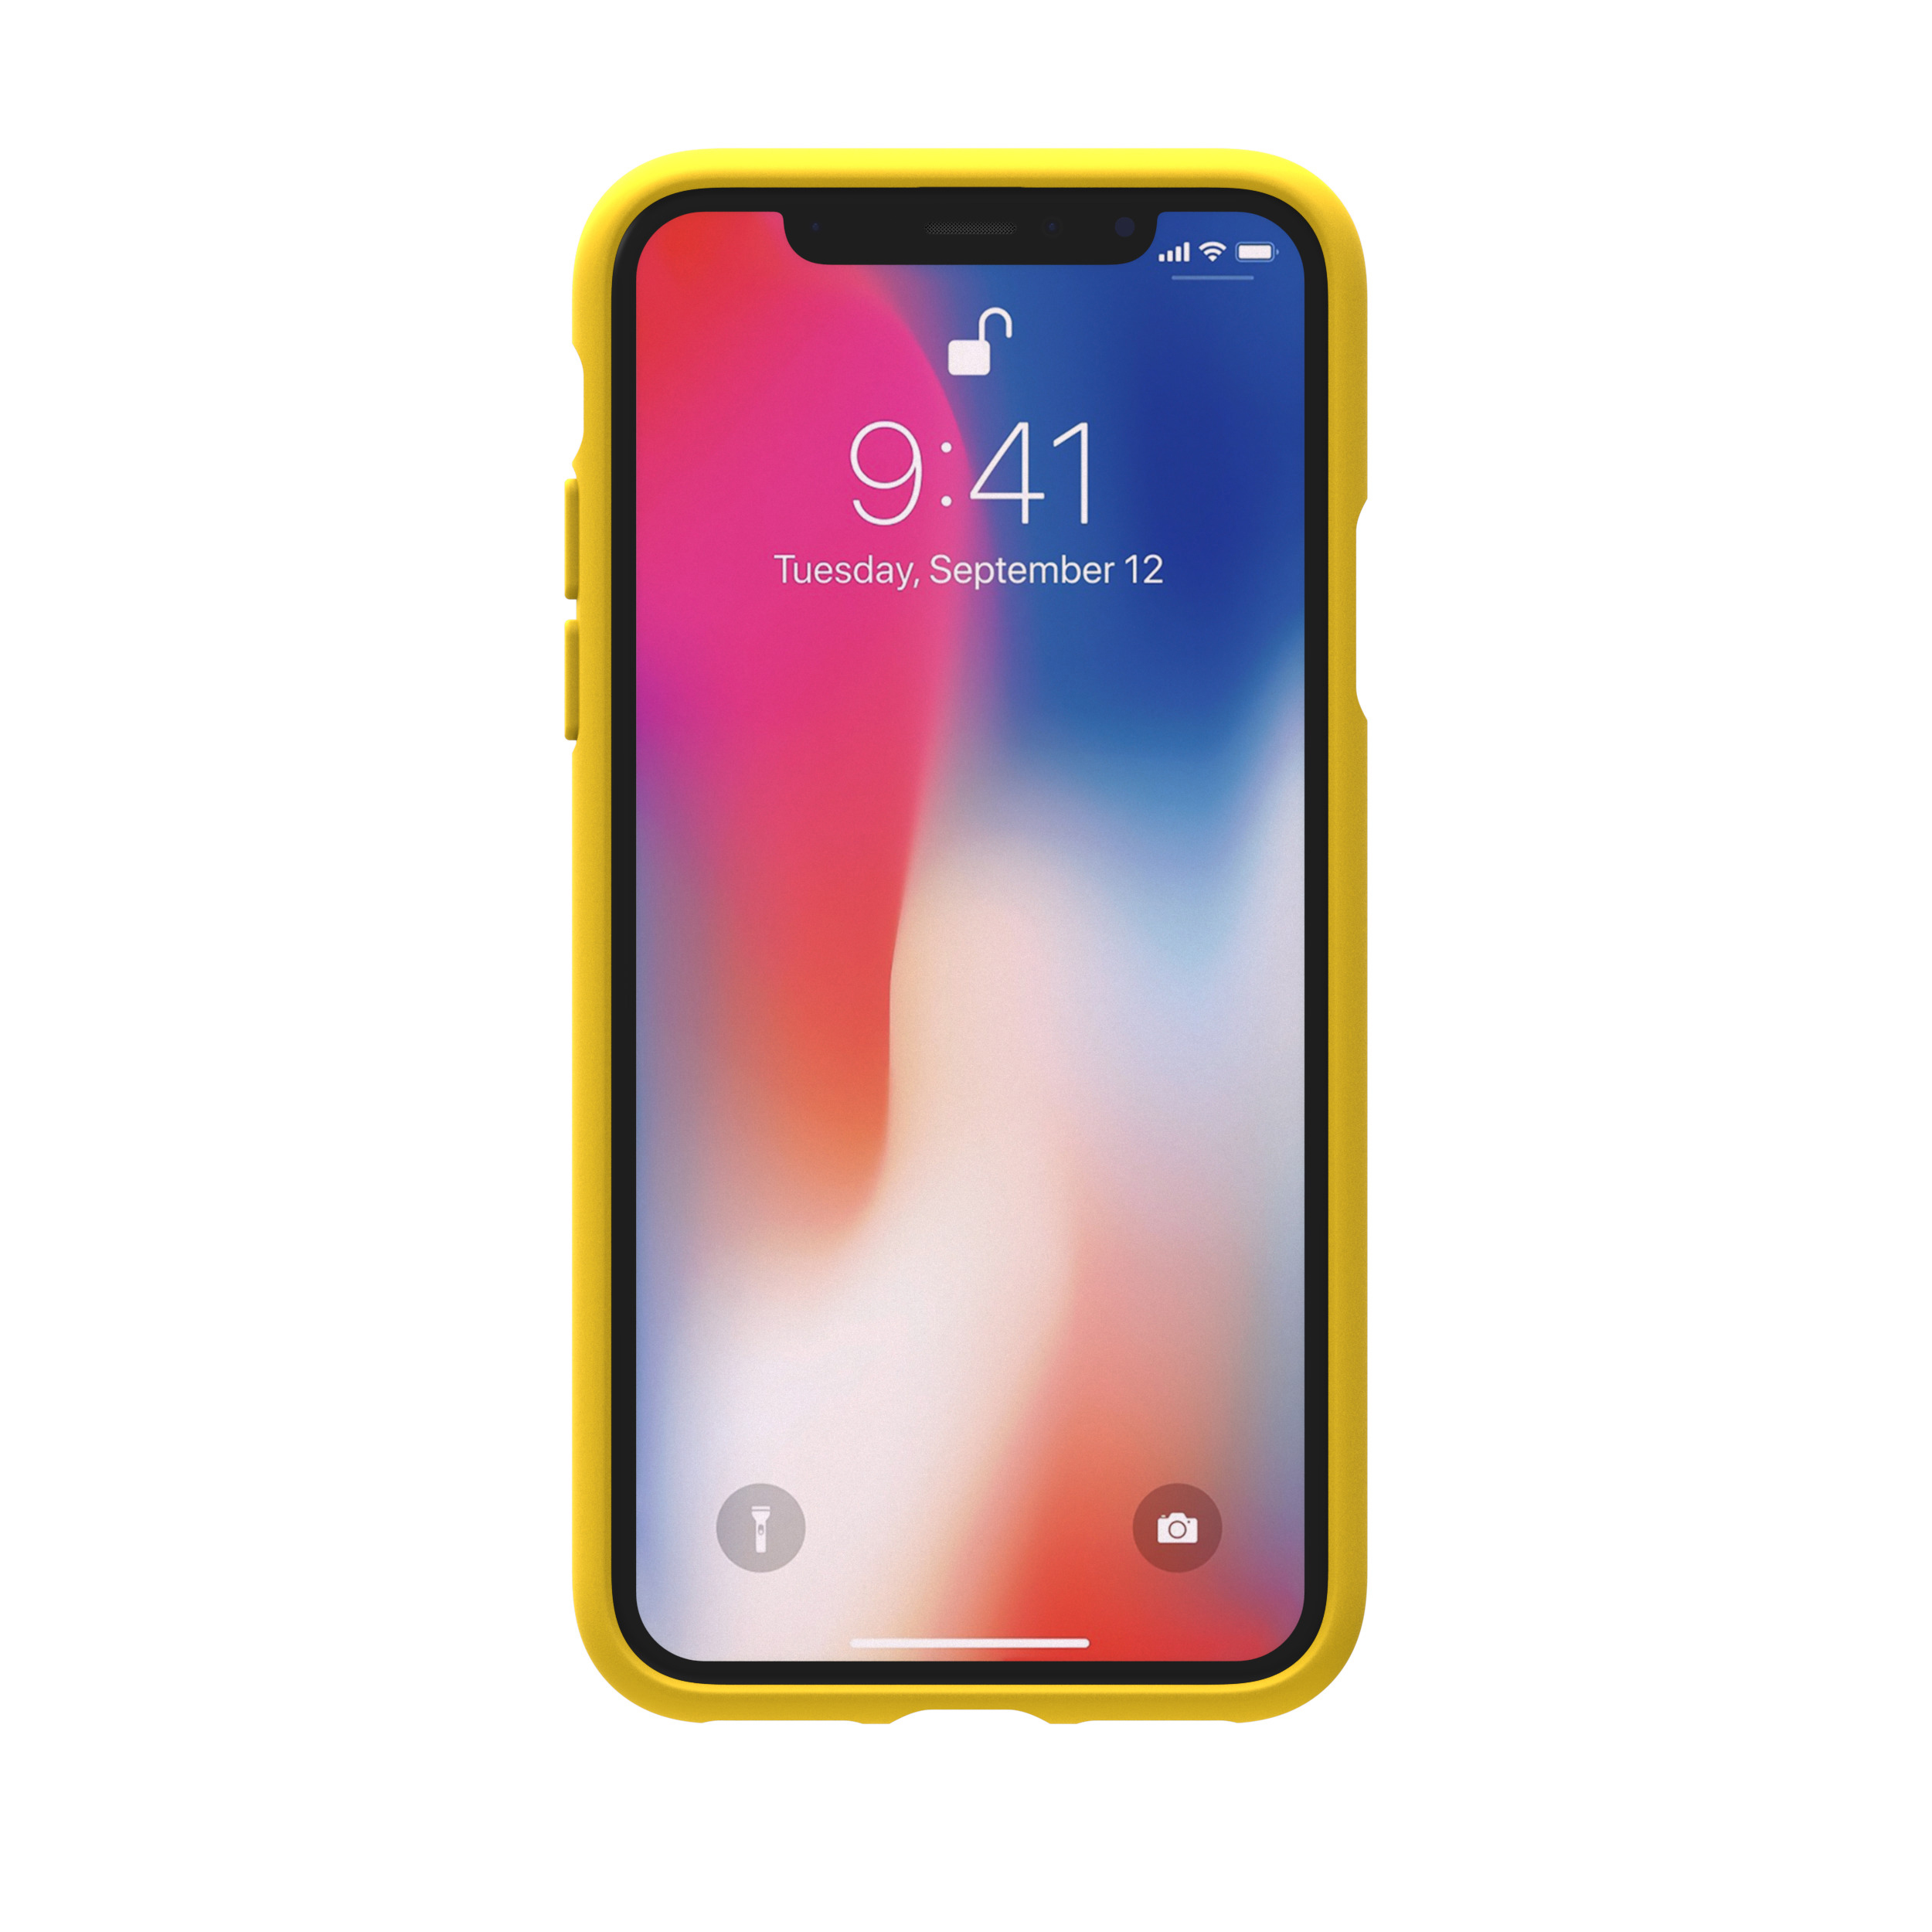 ADIDAS ORIGINALS Moulded Backcover, iPhone X, Case, Gelb Apple